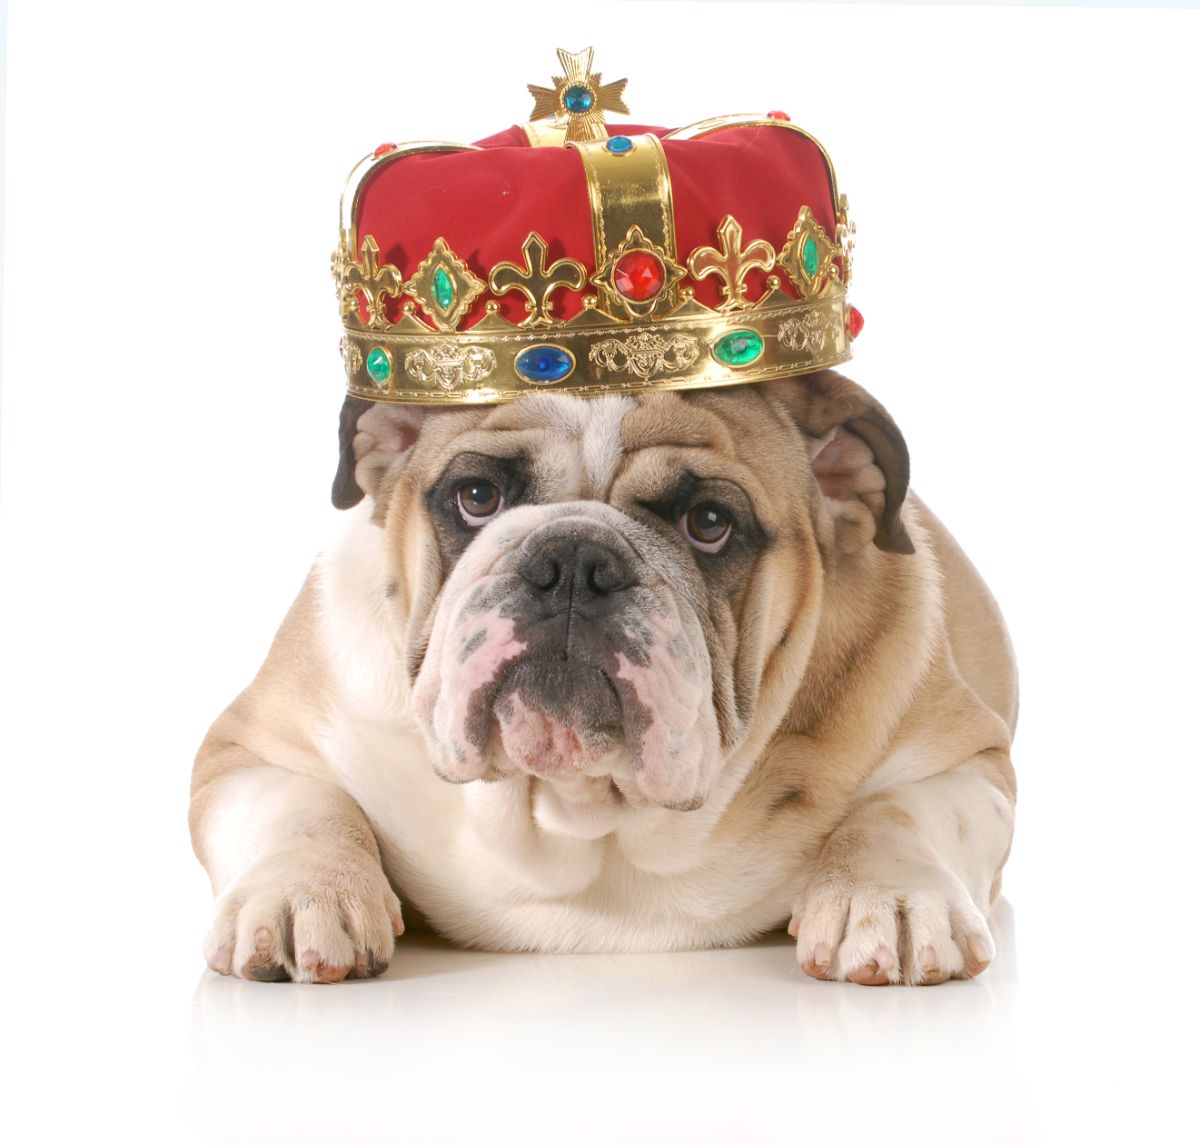 English Bulldog with crown lying on the floor, white background